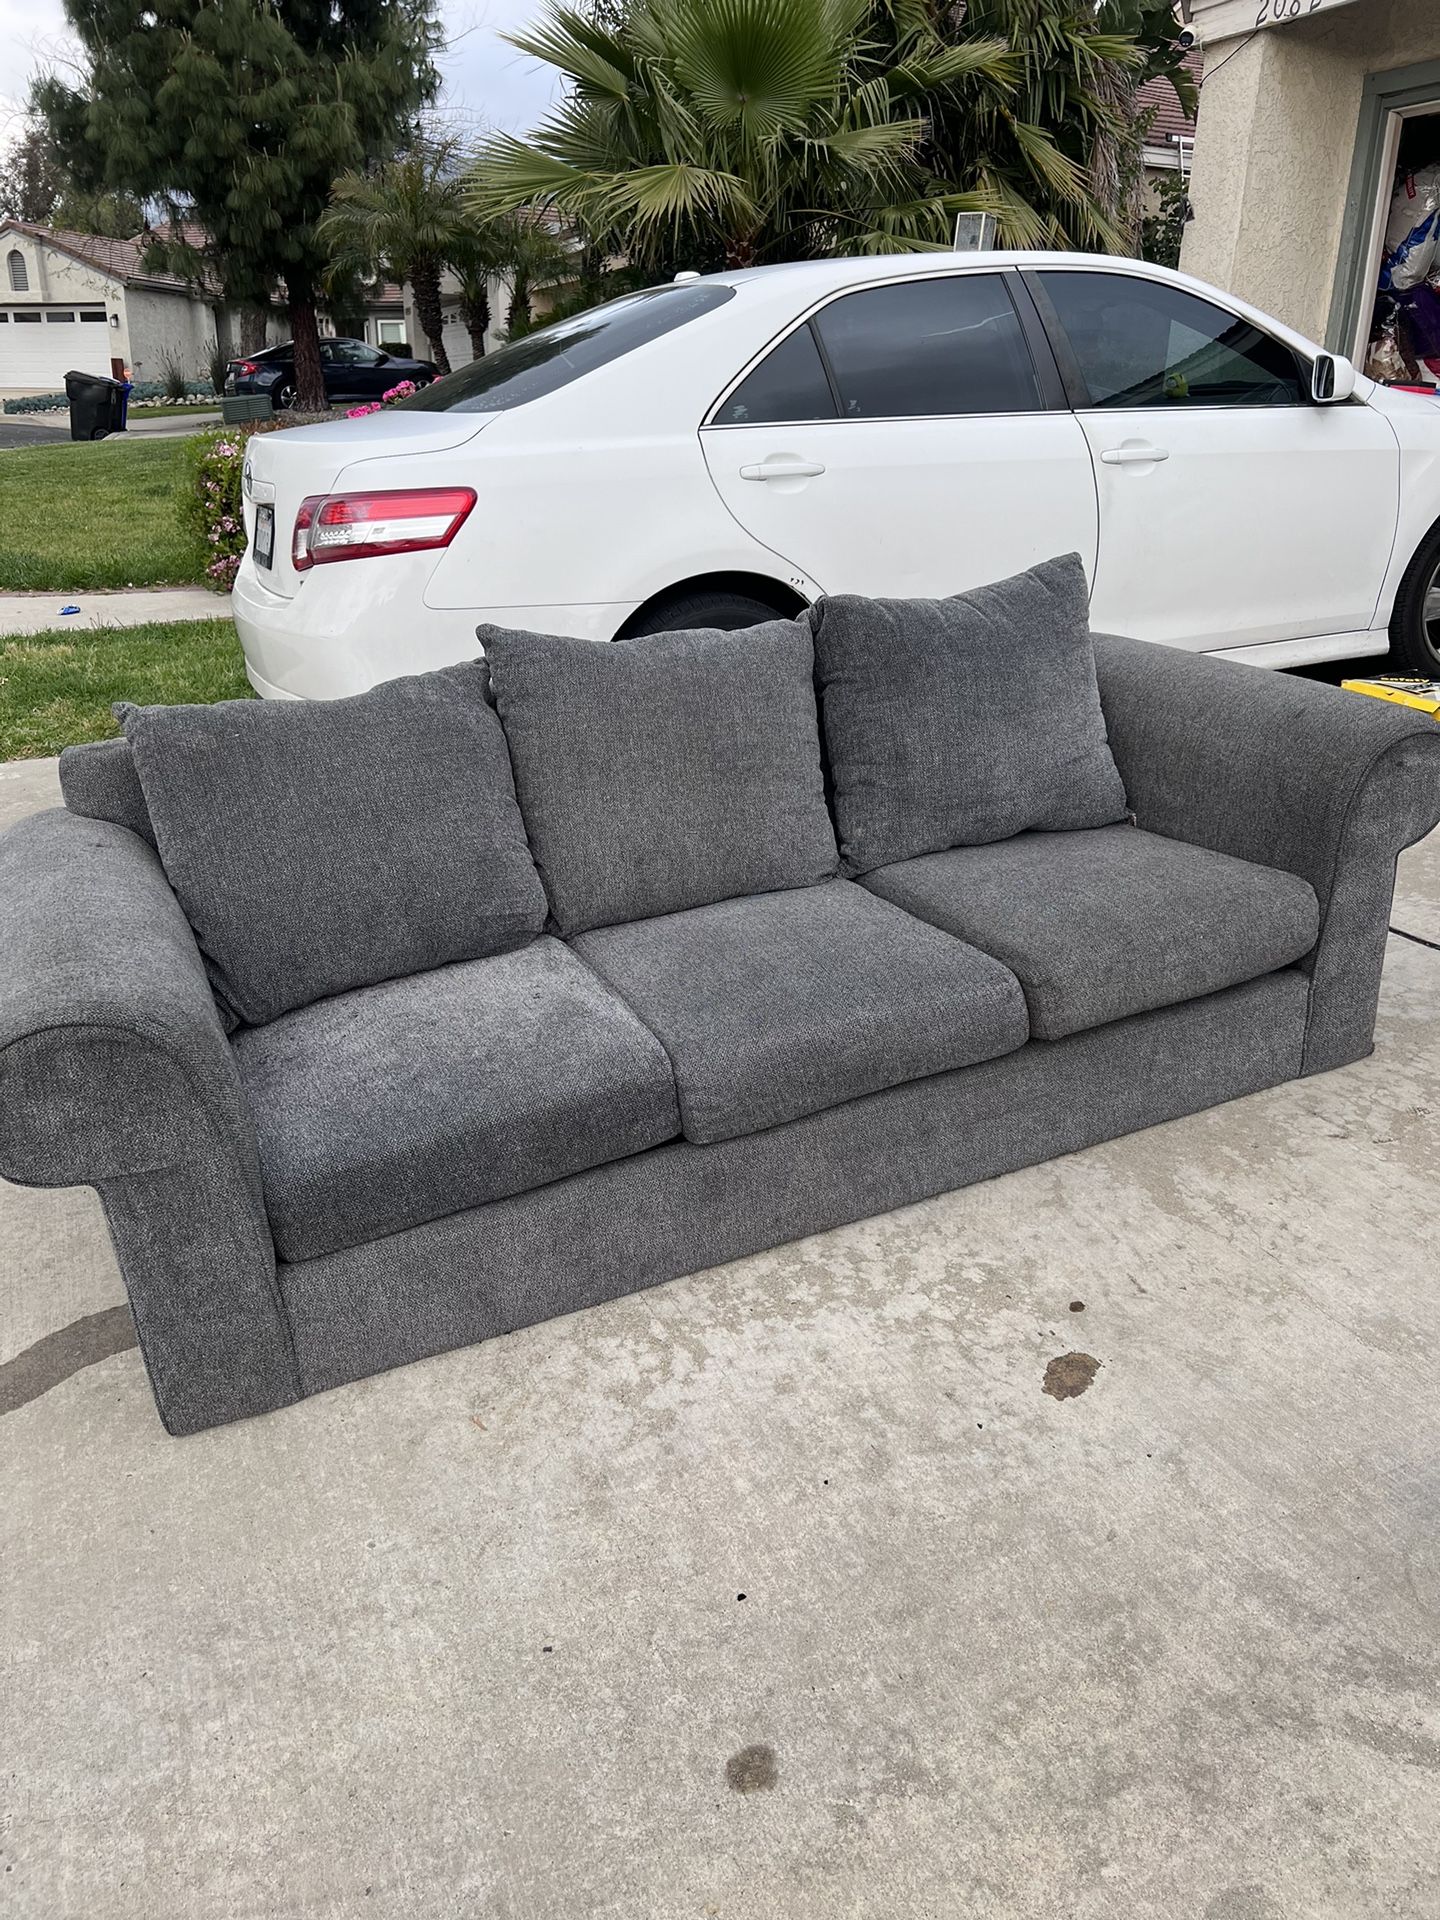 Couches (gray)